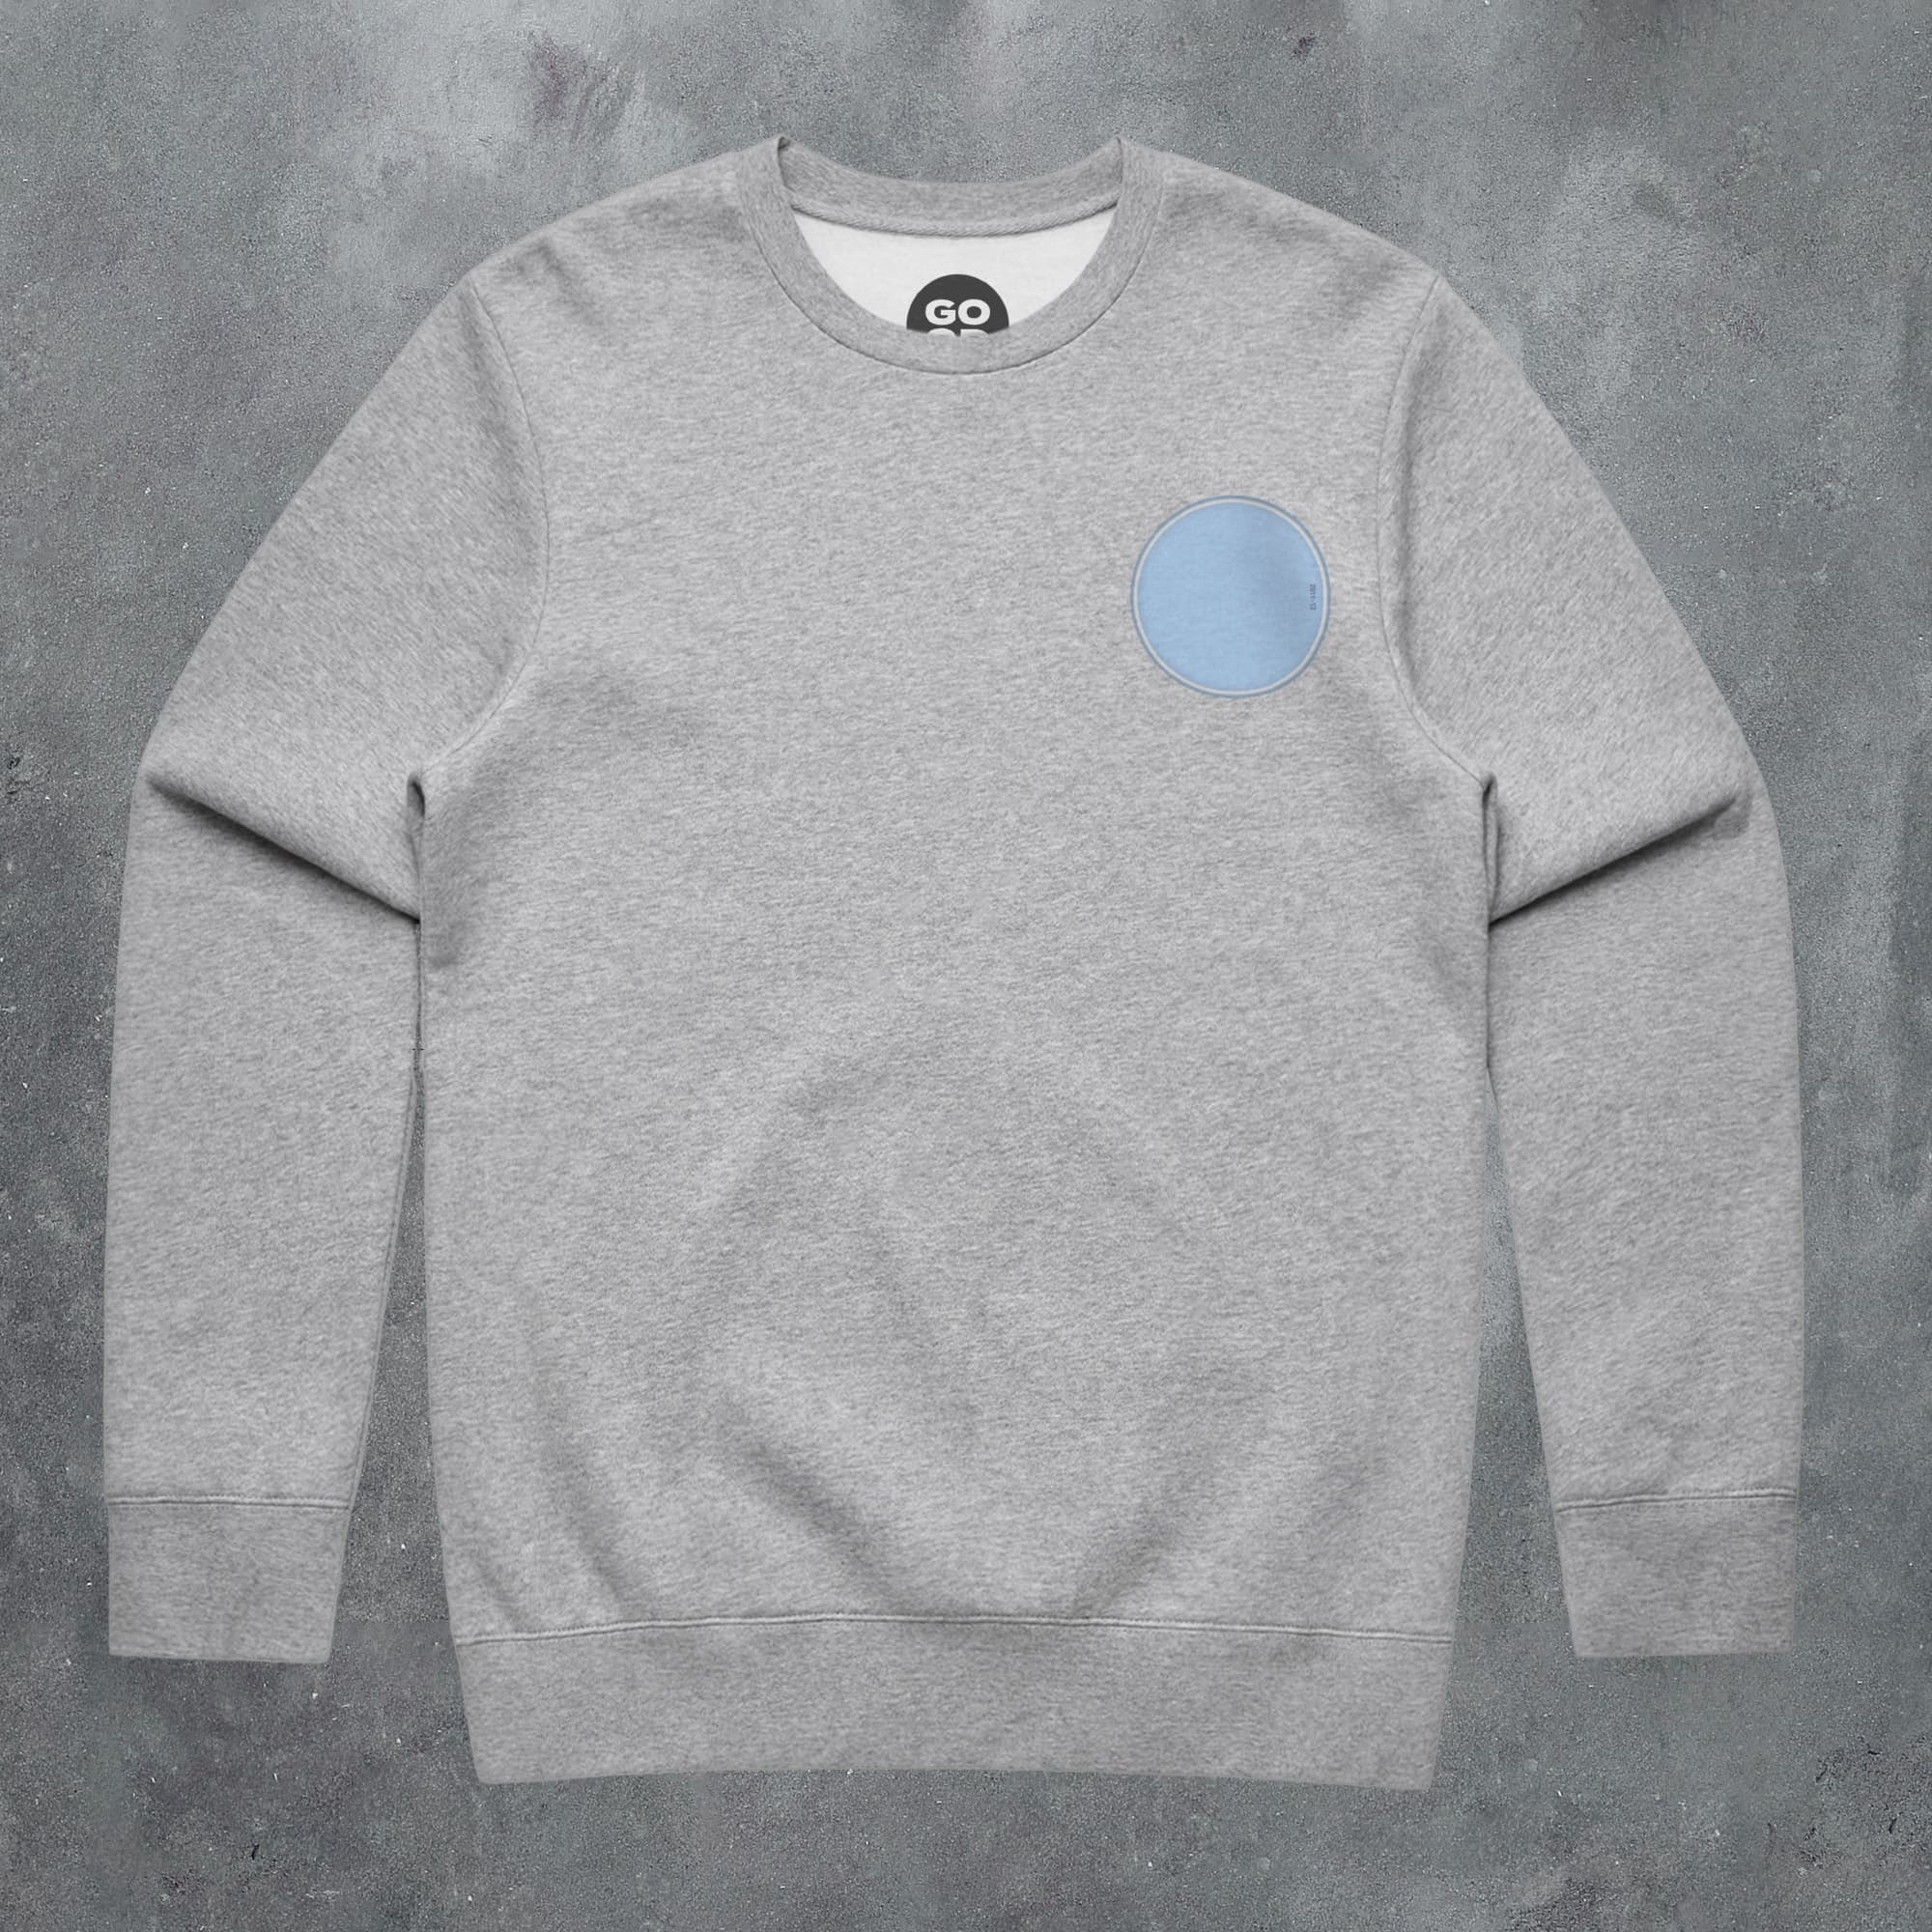 a grey sweatshirt with a blue circle on it